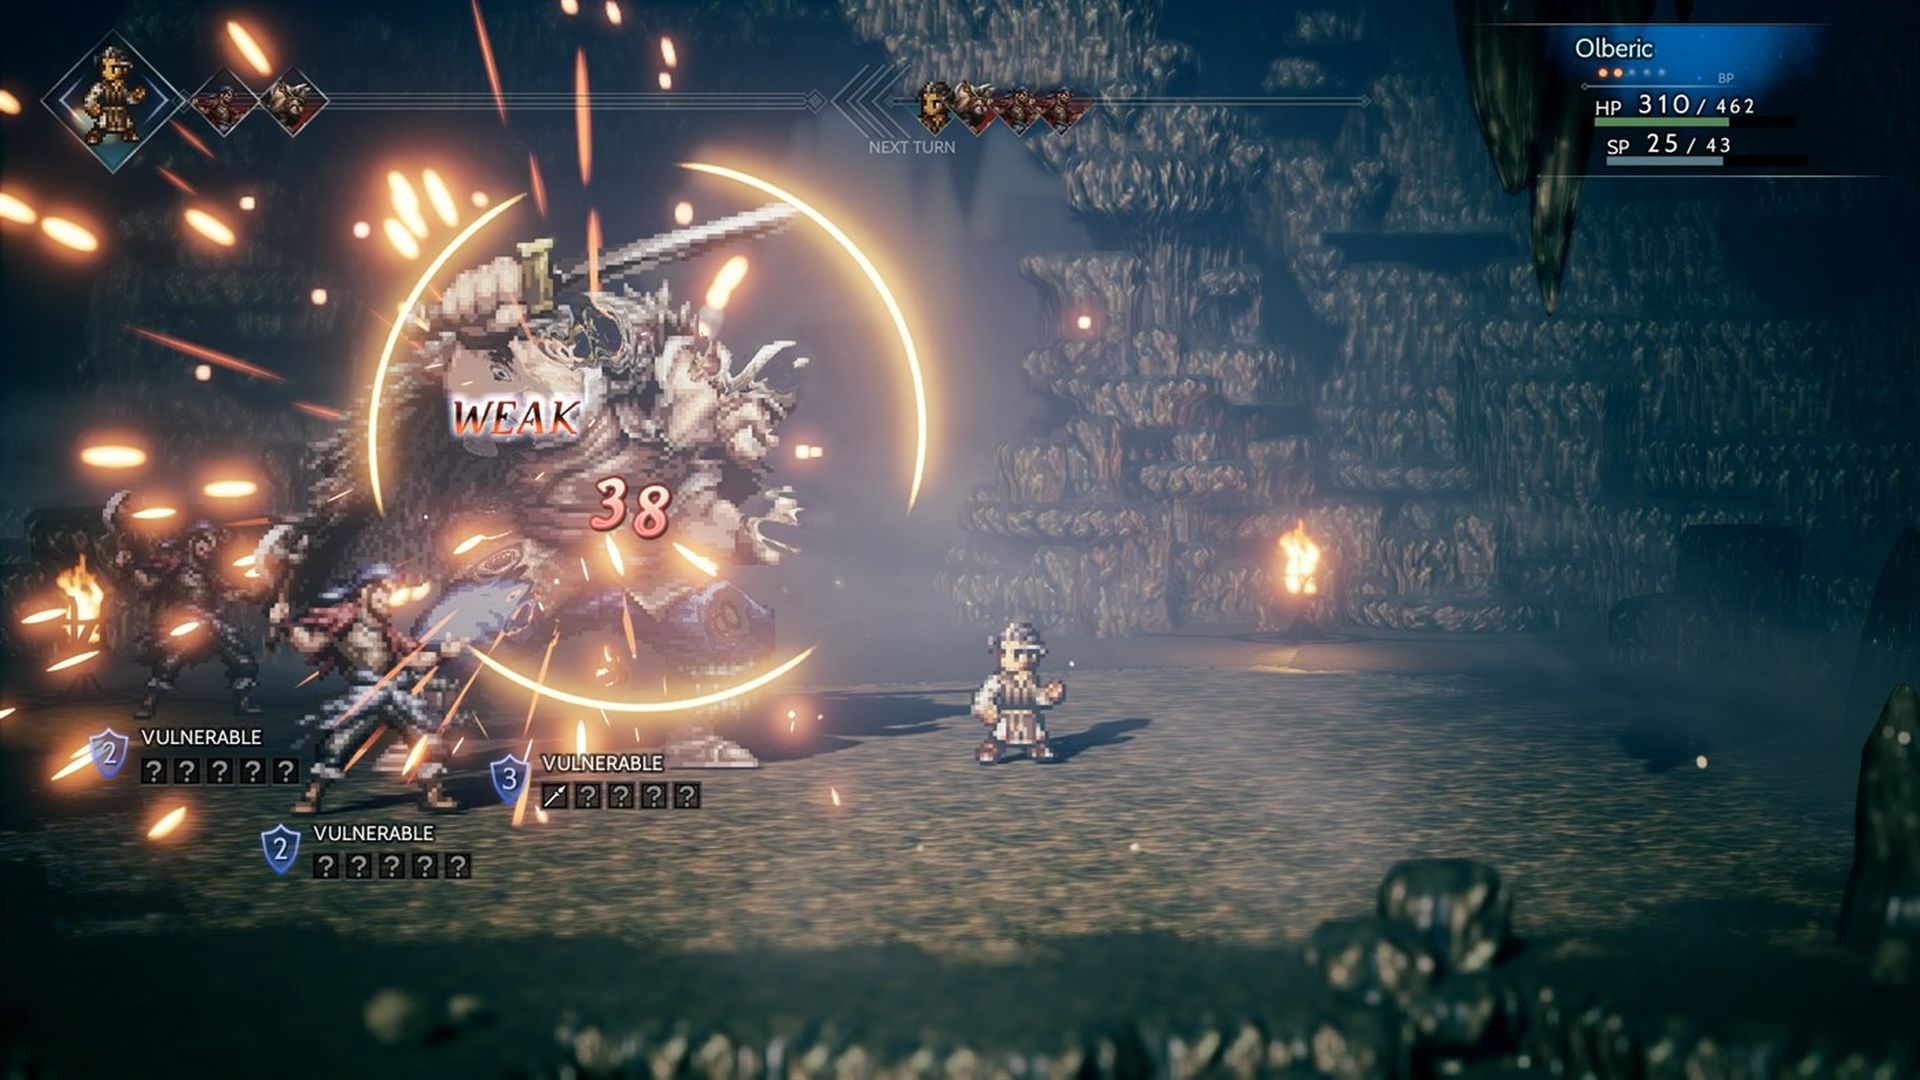 Octopath Traveler – March 25 – Xbox Game Pass